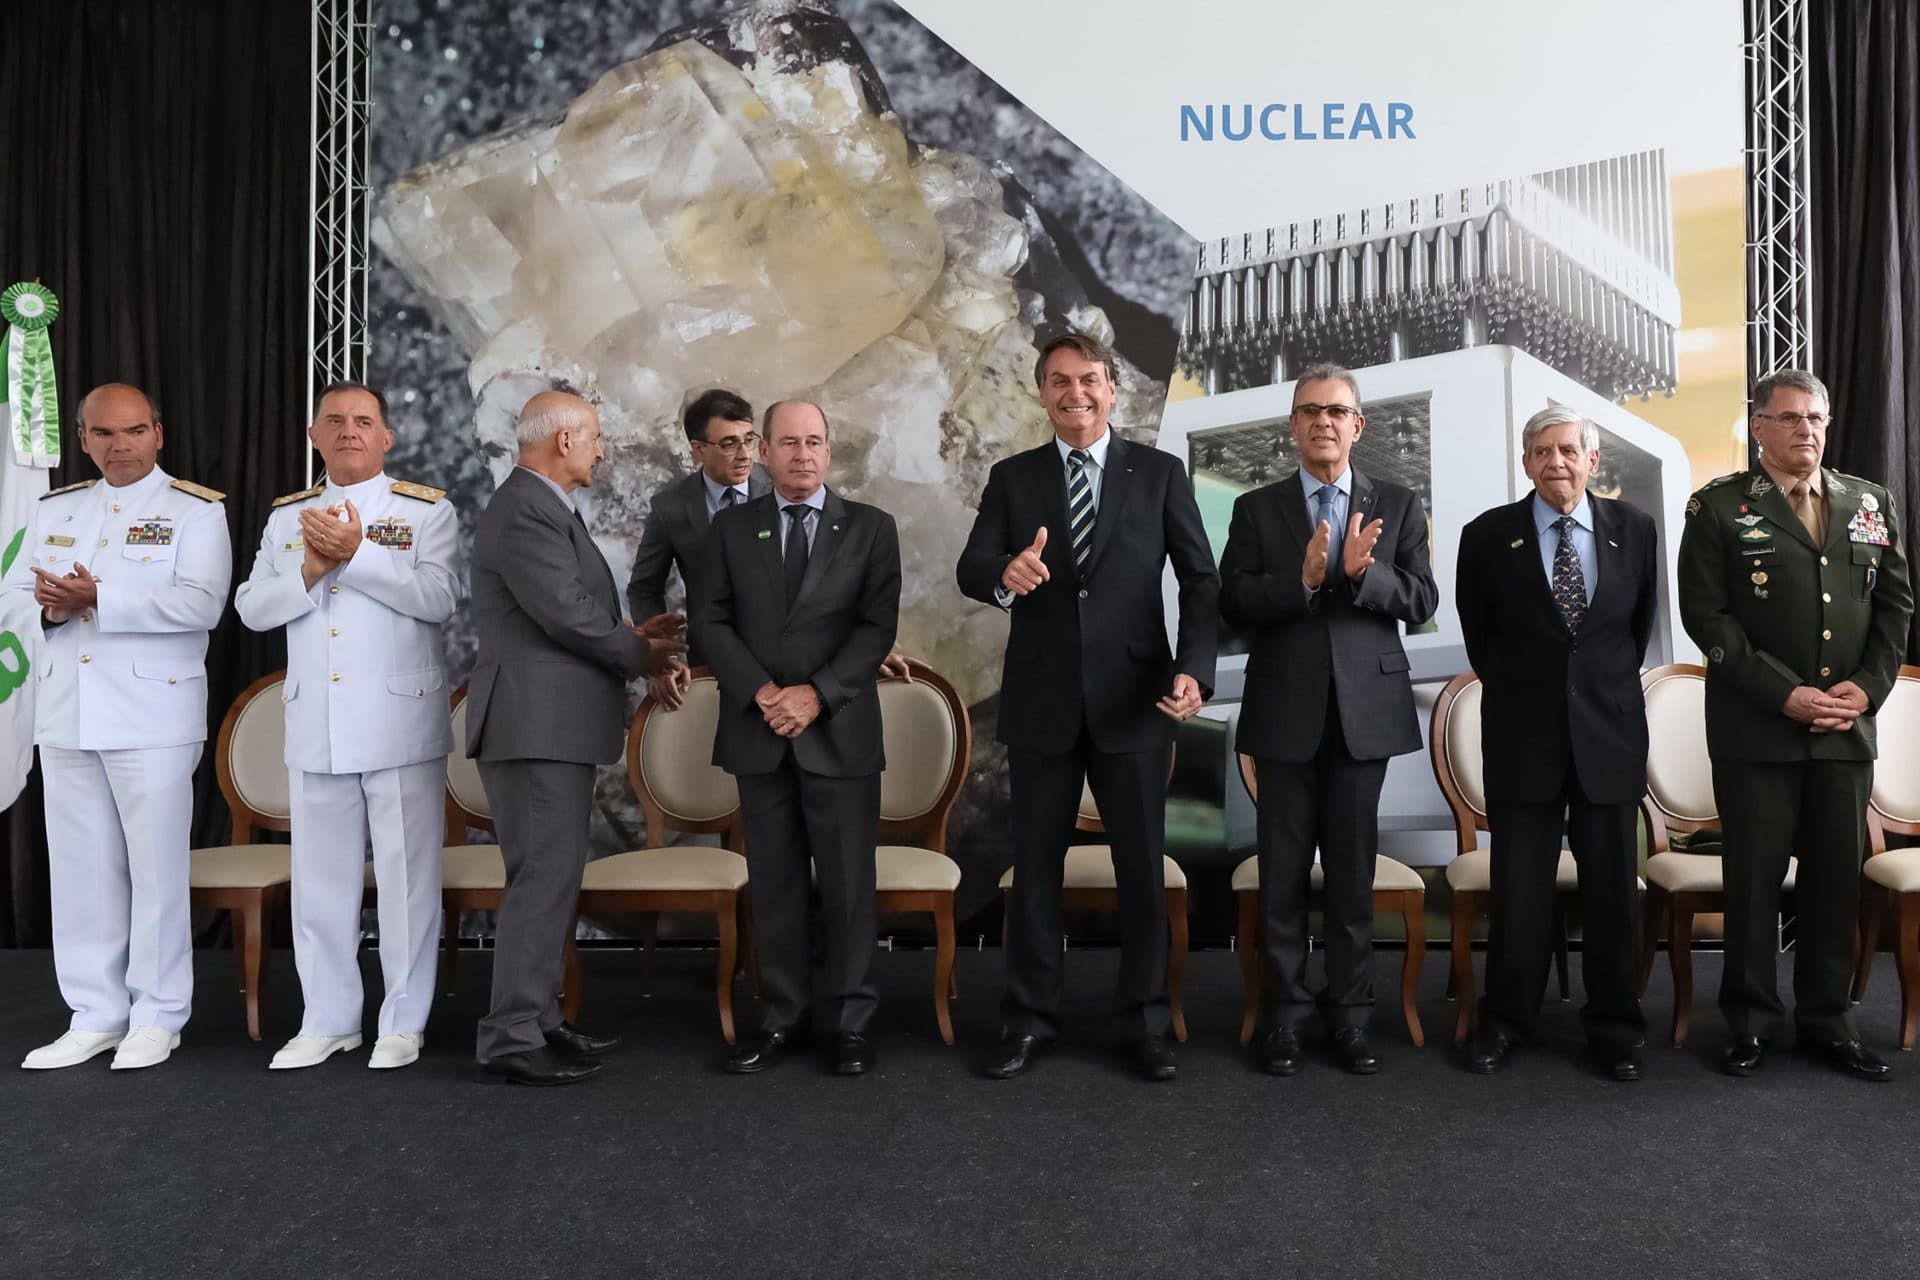 Brazil's president at the 2019 inauguration of uranium-enrichment centrifuges that supply fuel for the Angra nuclear reactors